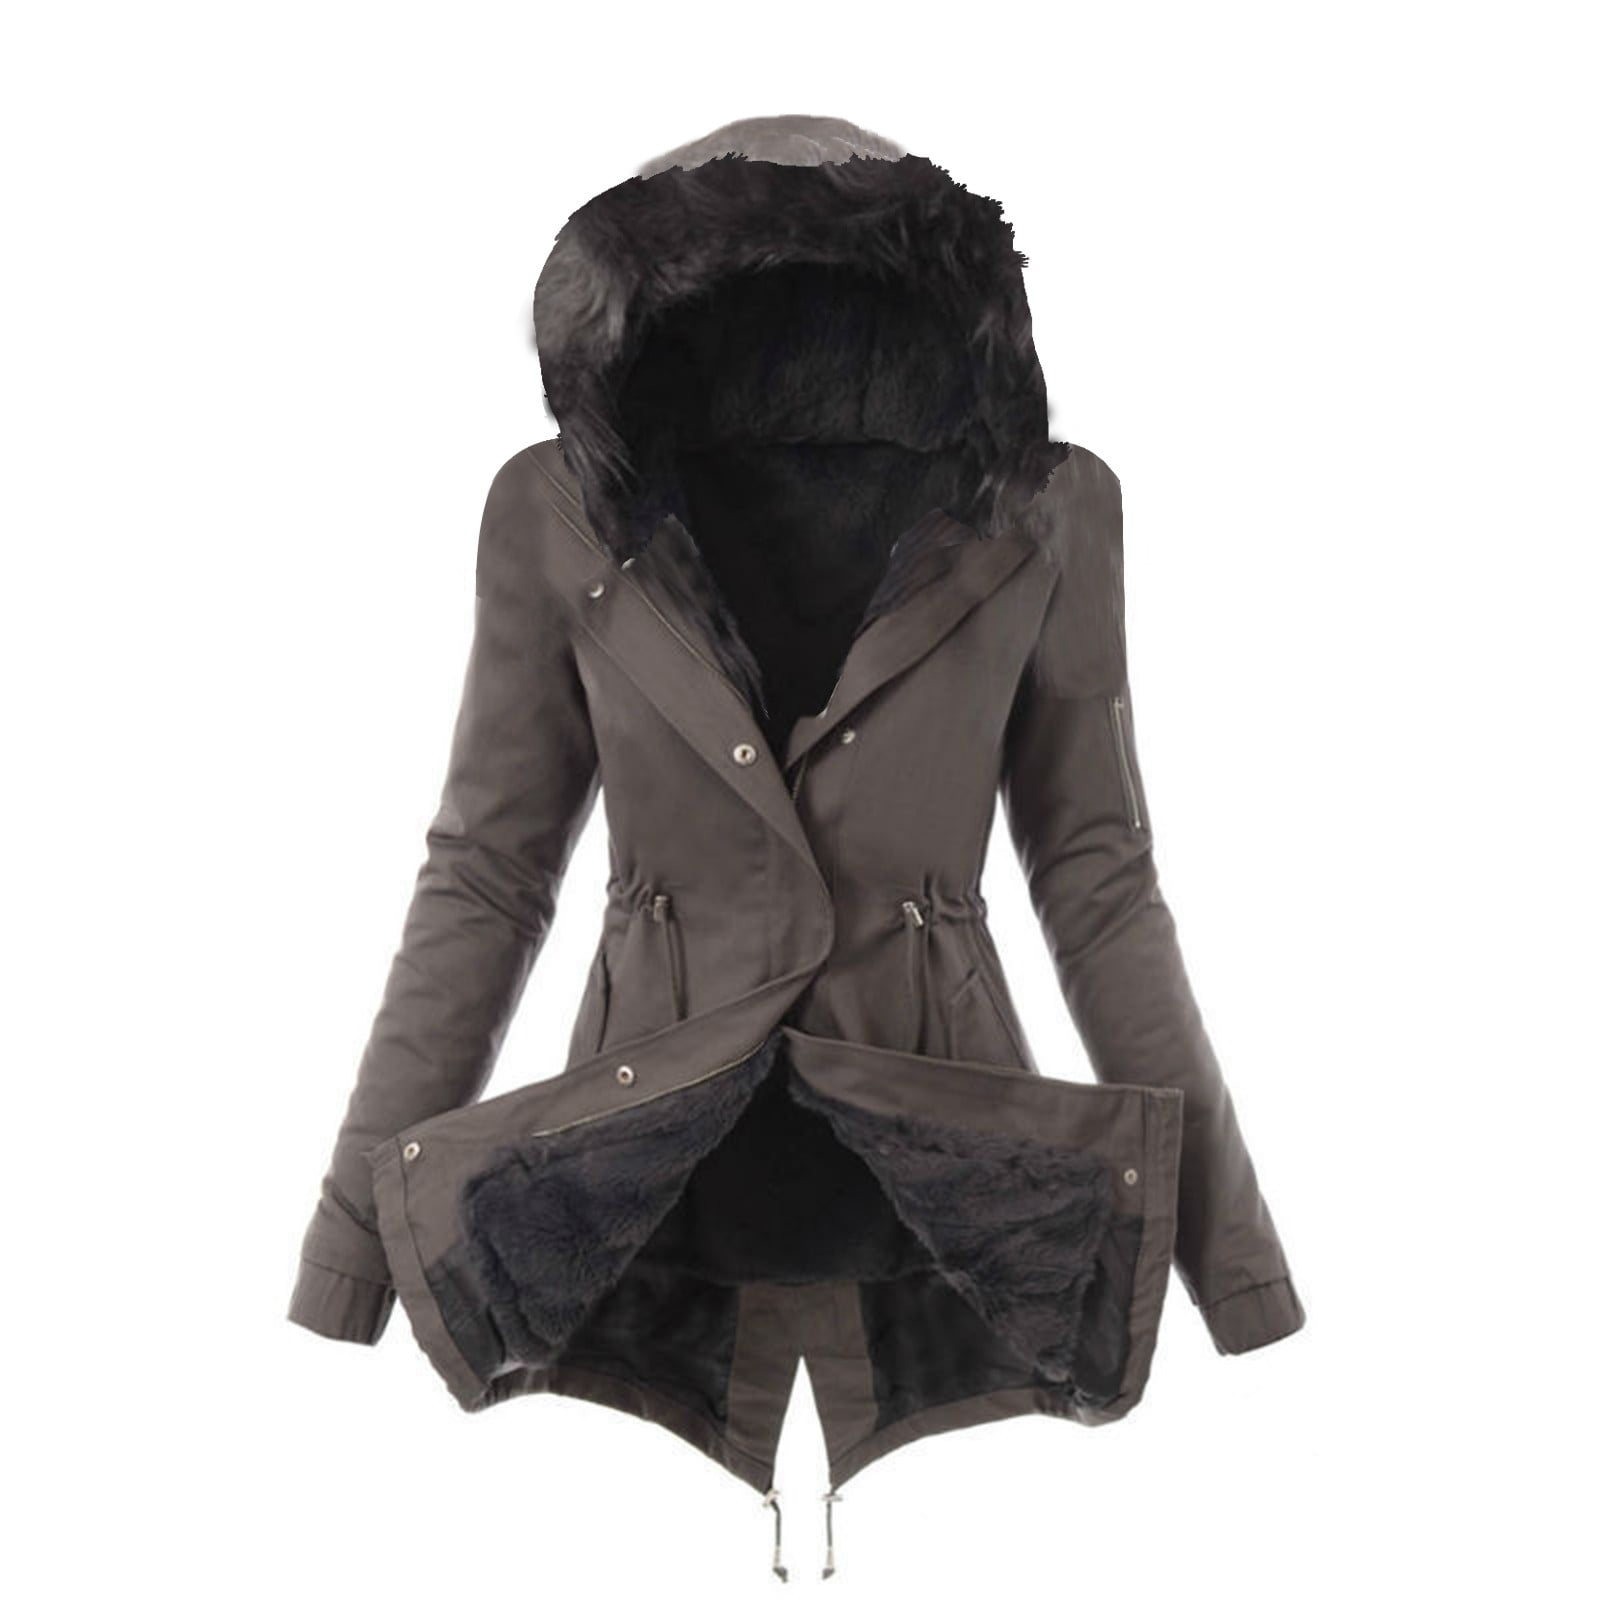 Womens Hooded Warm Winter Coats with Faux Fur Lined Outerwear Jacket ...